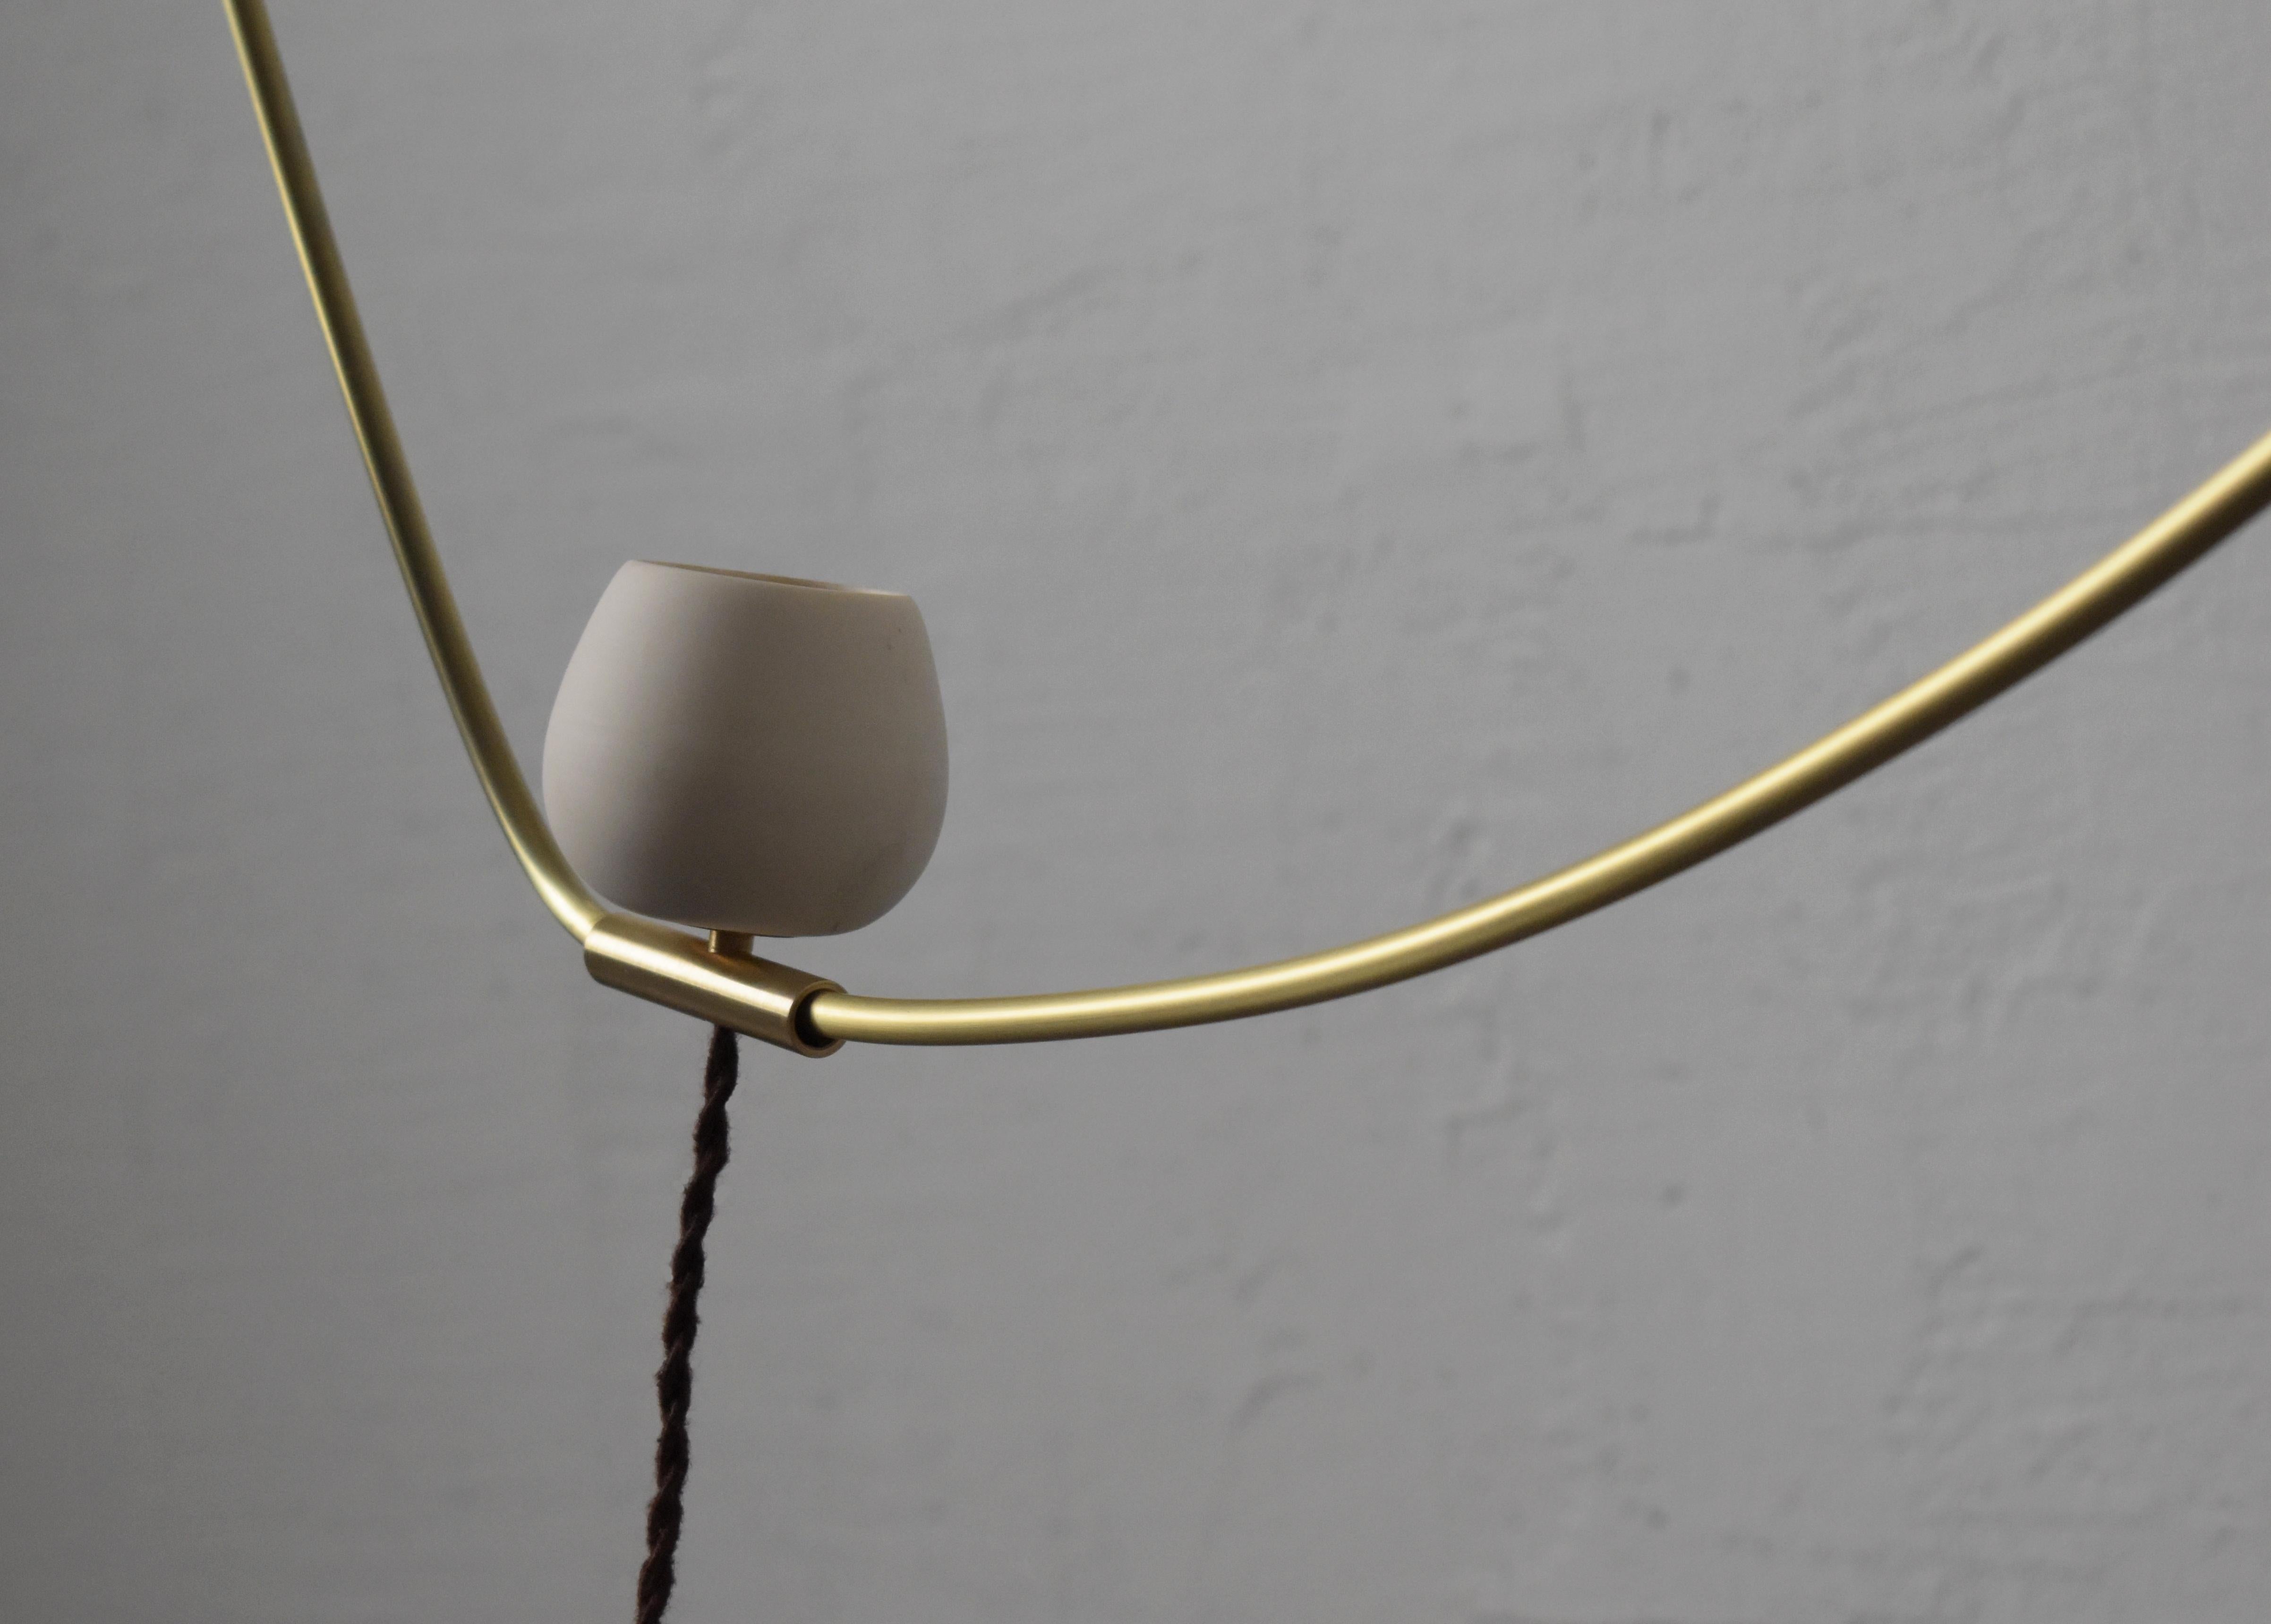 Modern Omicron Brass Hanging Light Object by Periclis Frementitis For Sale